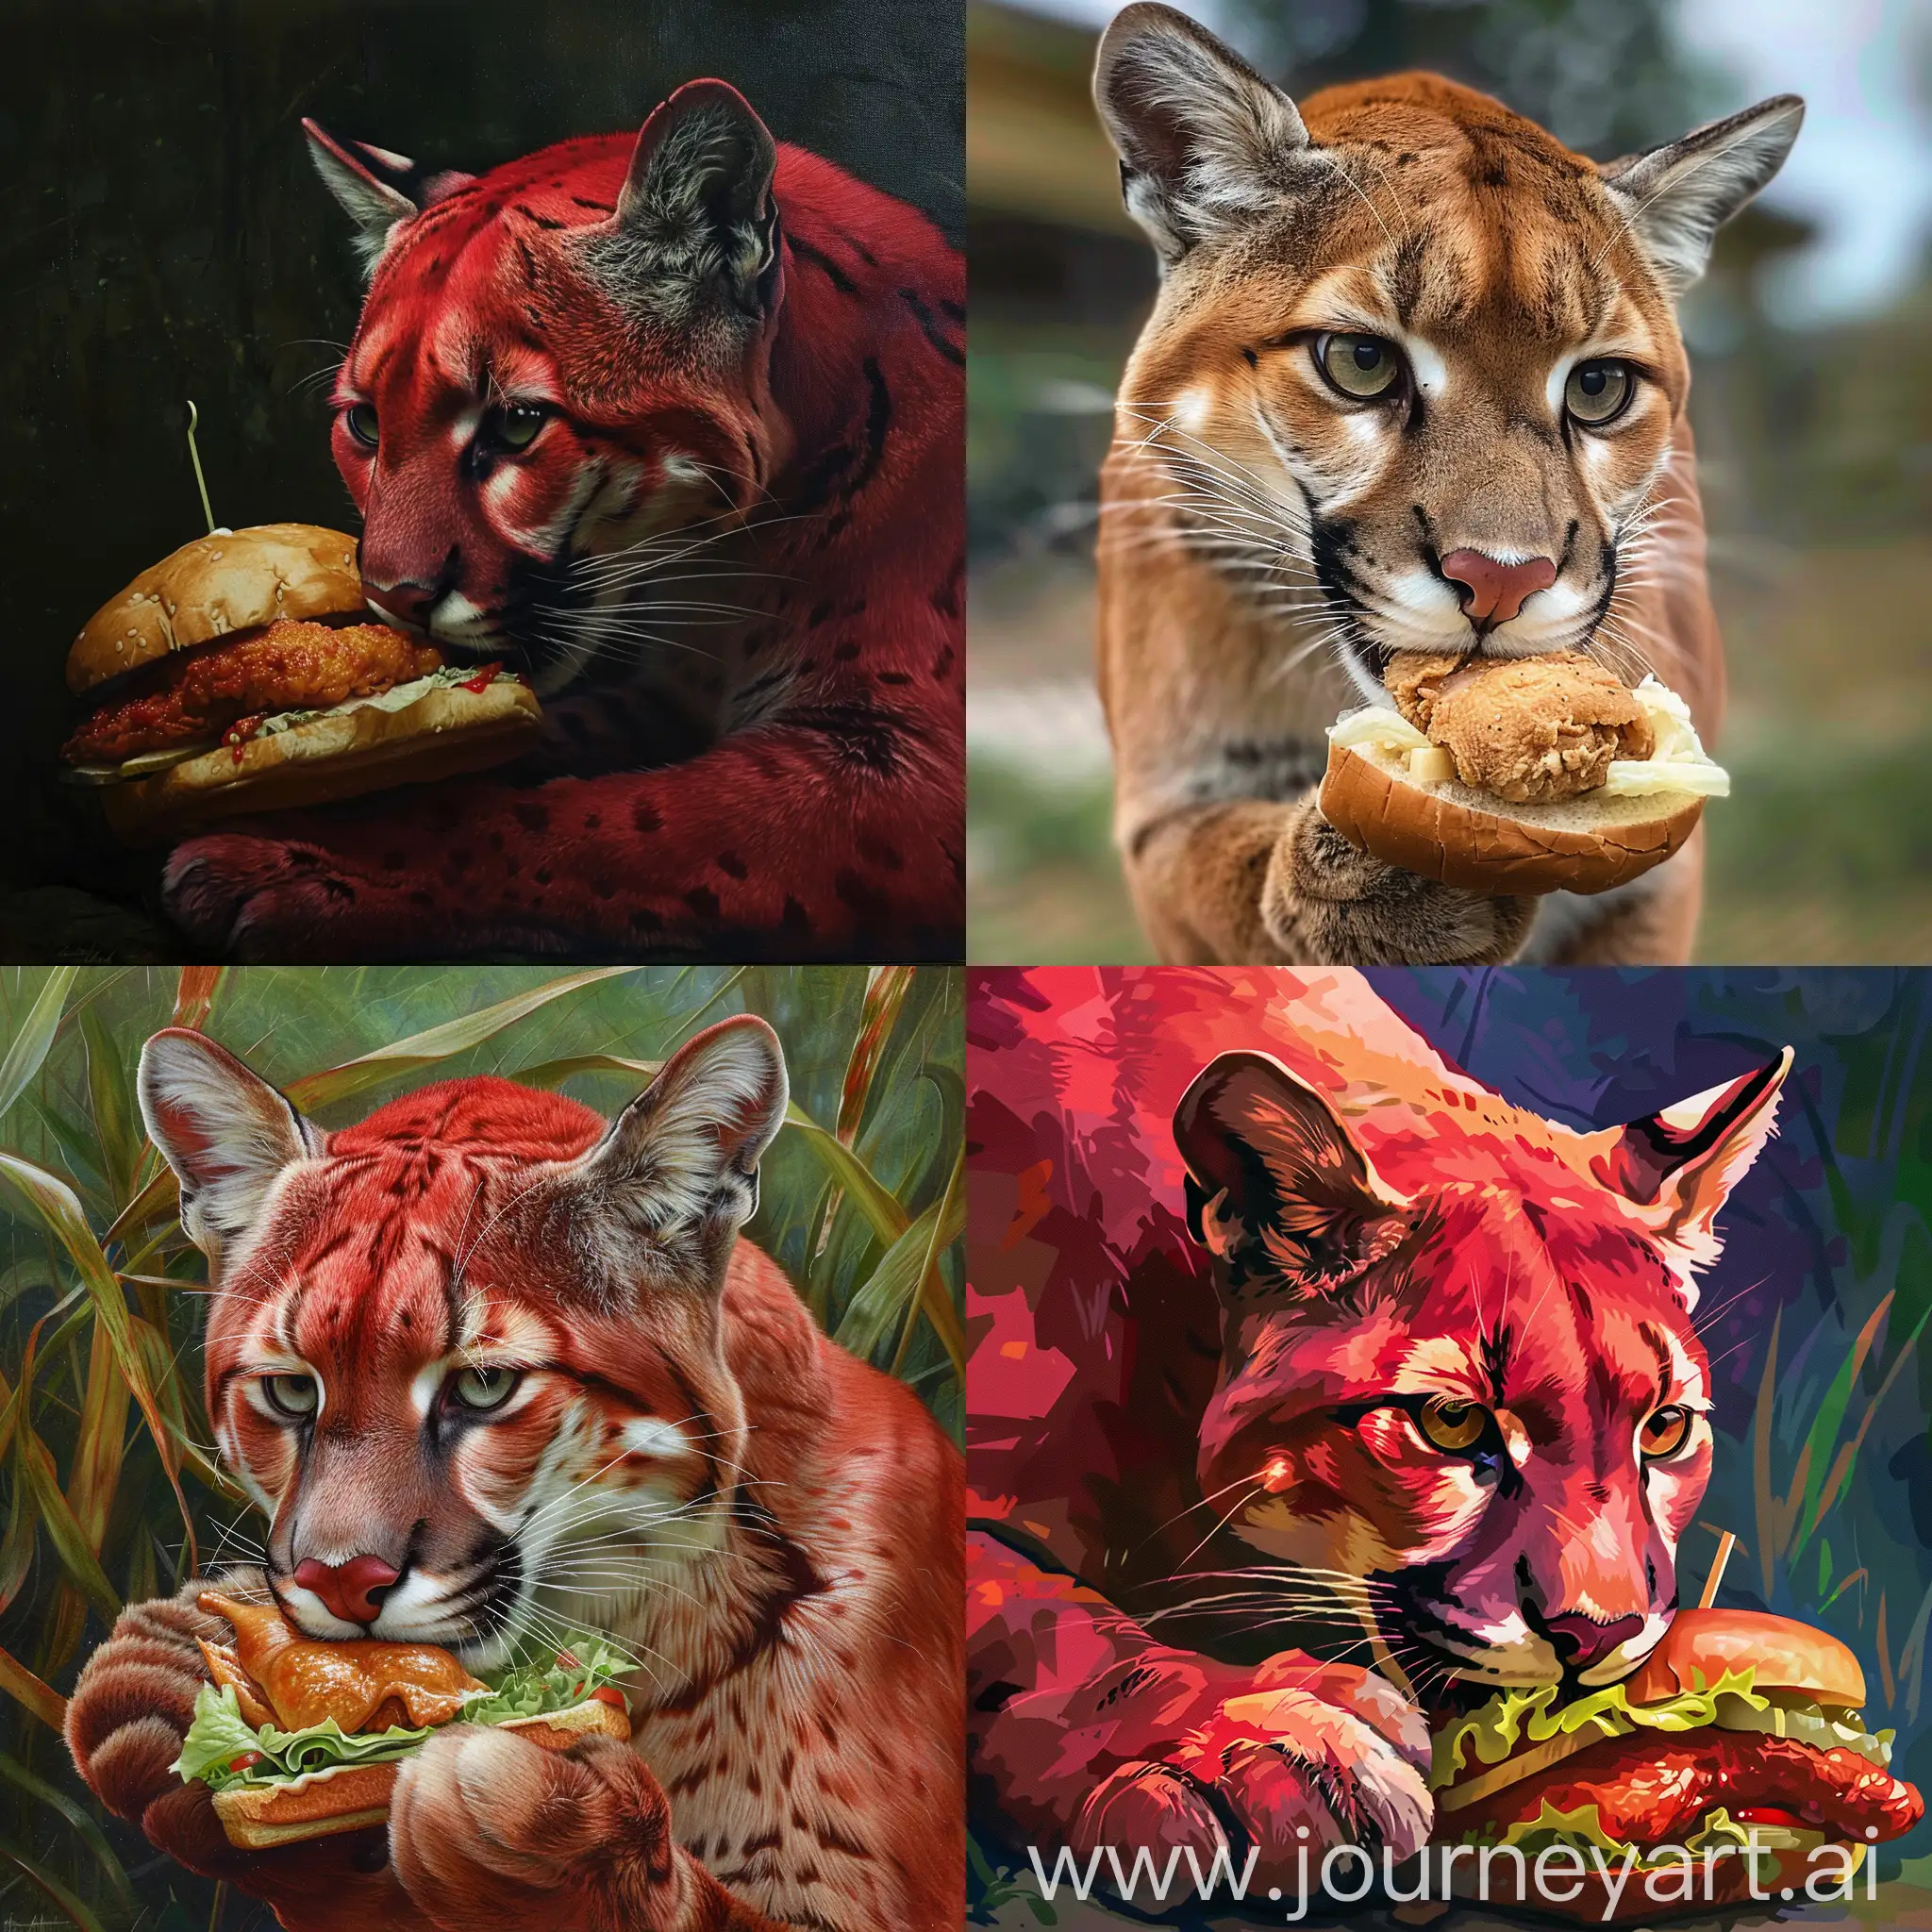 red cougar eating a chicken sandwich